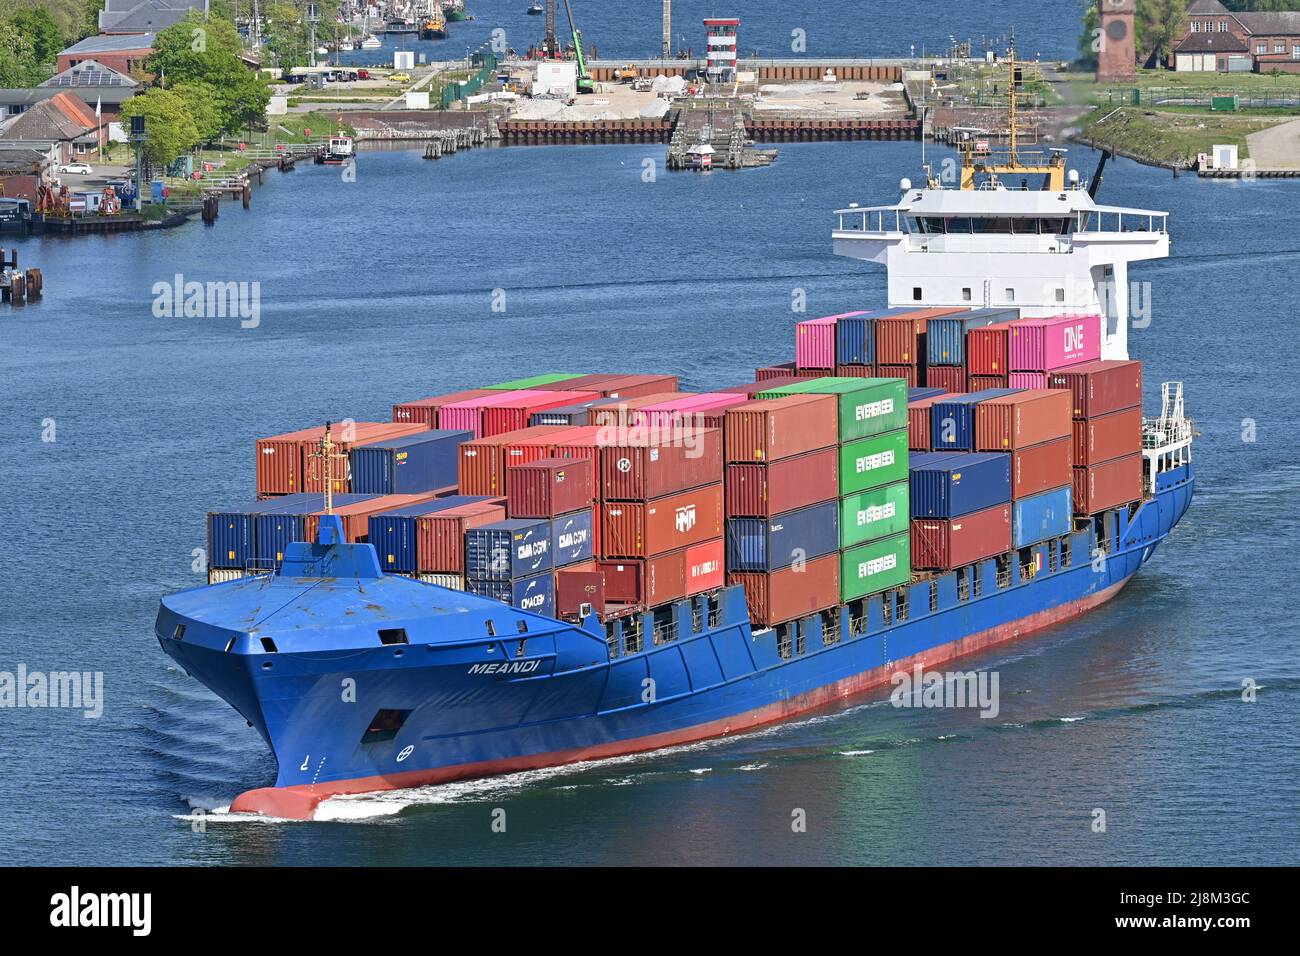 Containership MEANDI passing the Kiel Canal Stock Photo